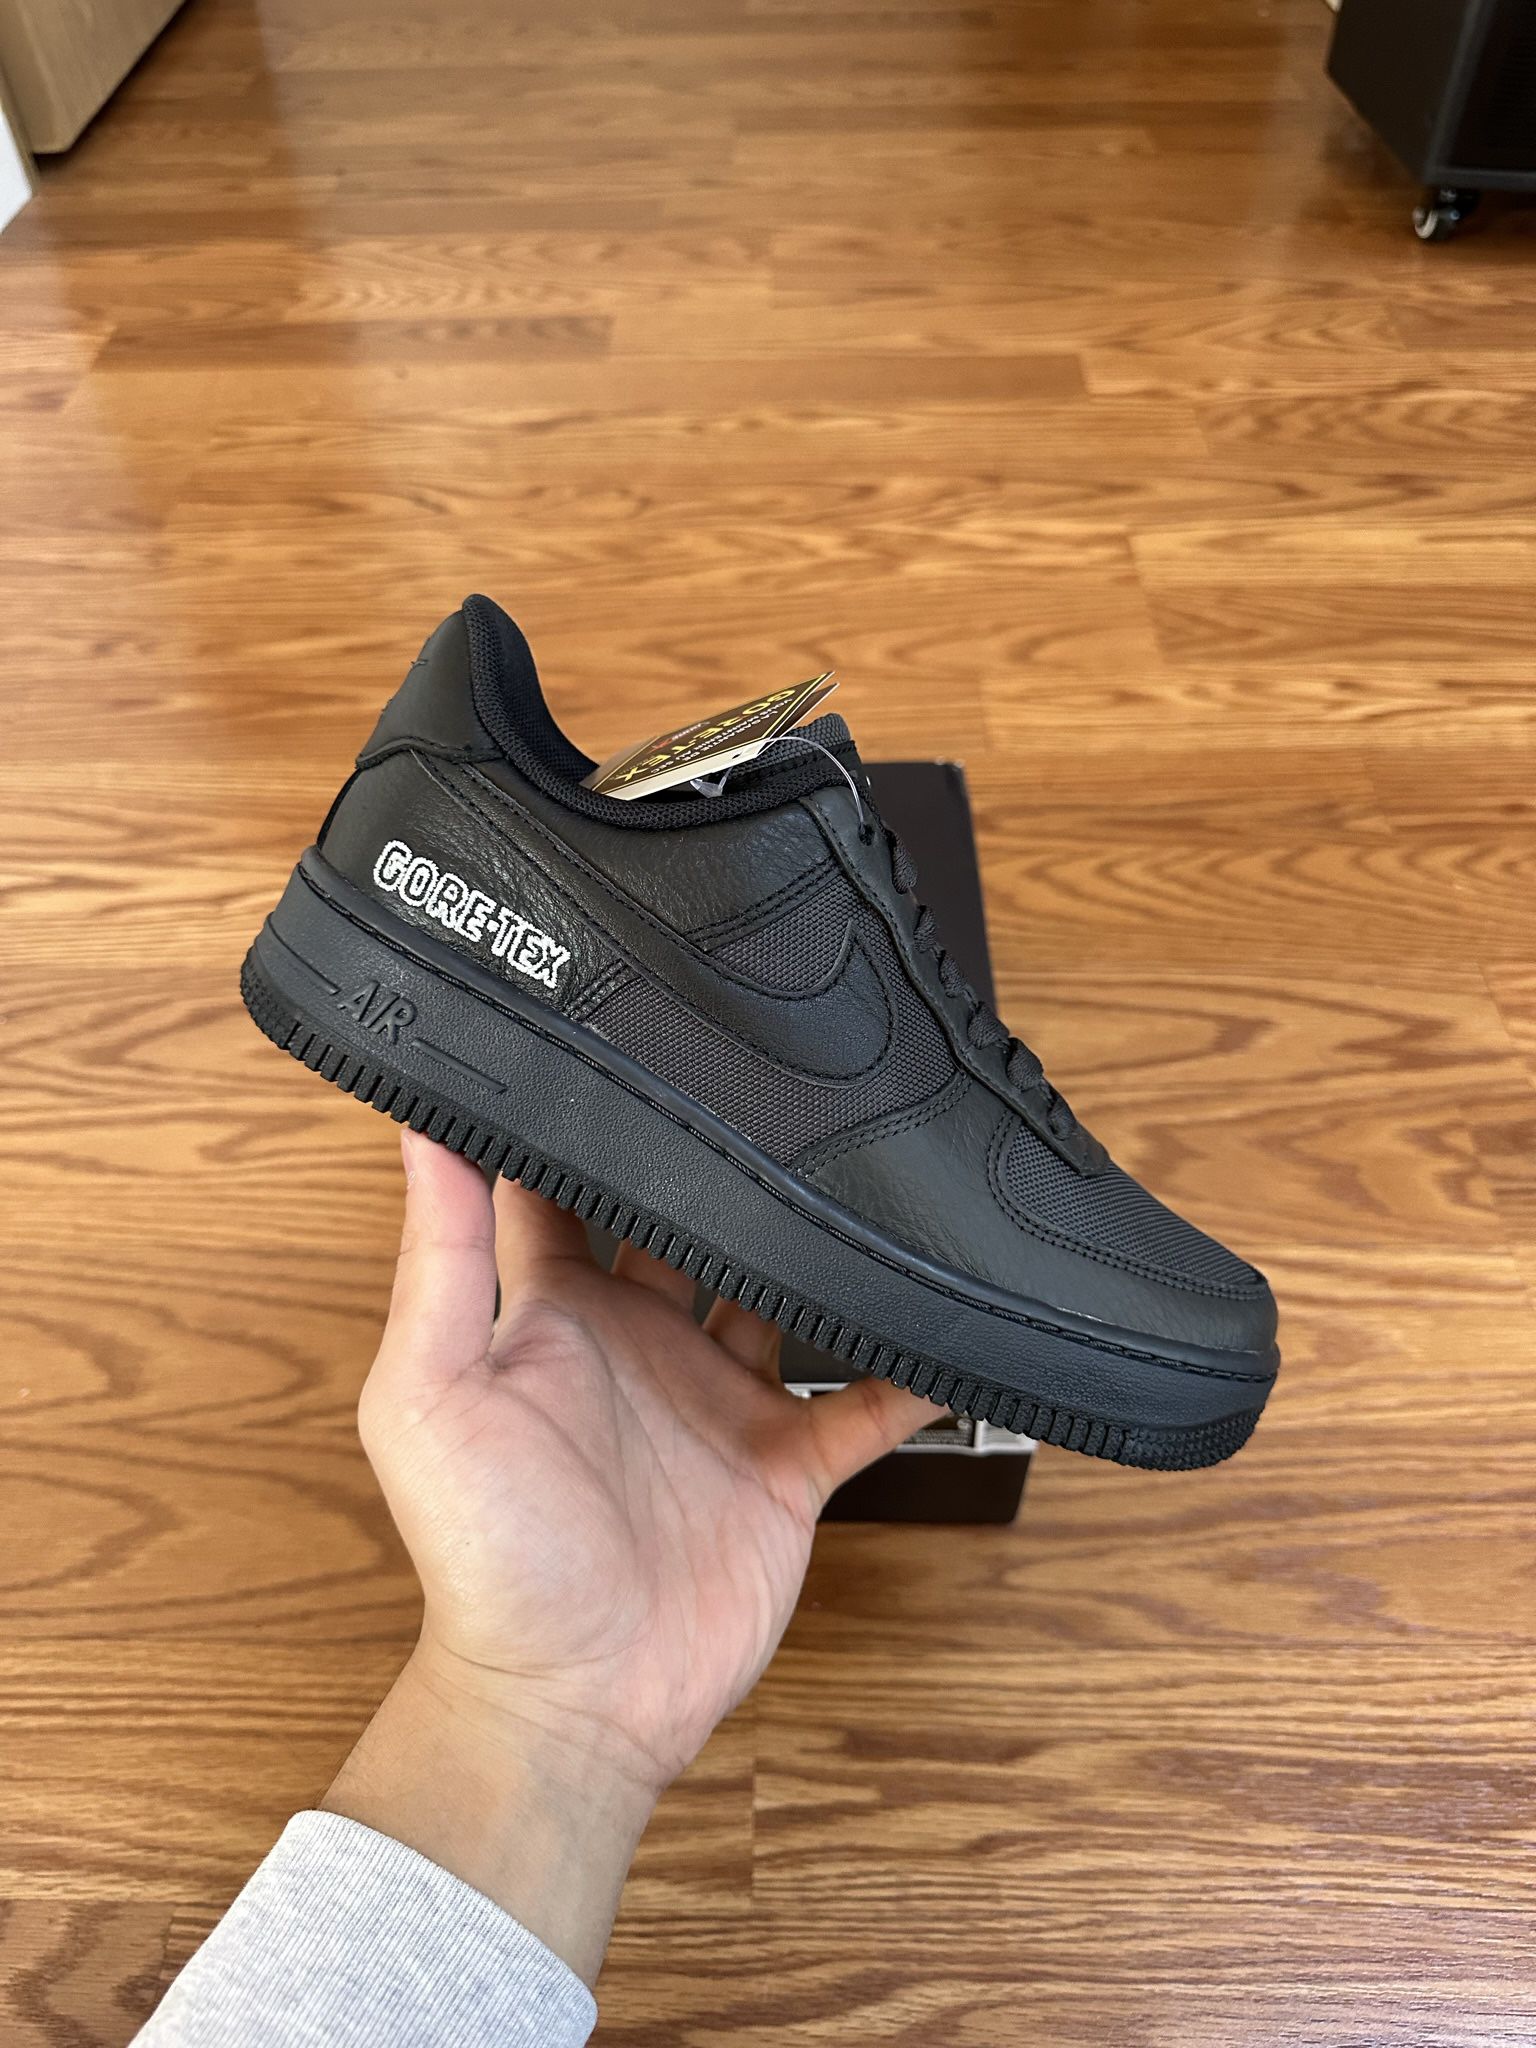 Nike Air Force 1 GTX Anthracite Grey Size 5M